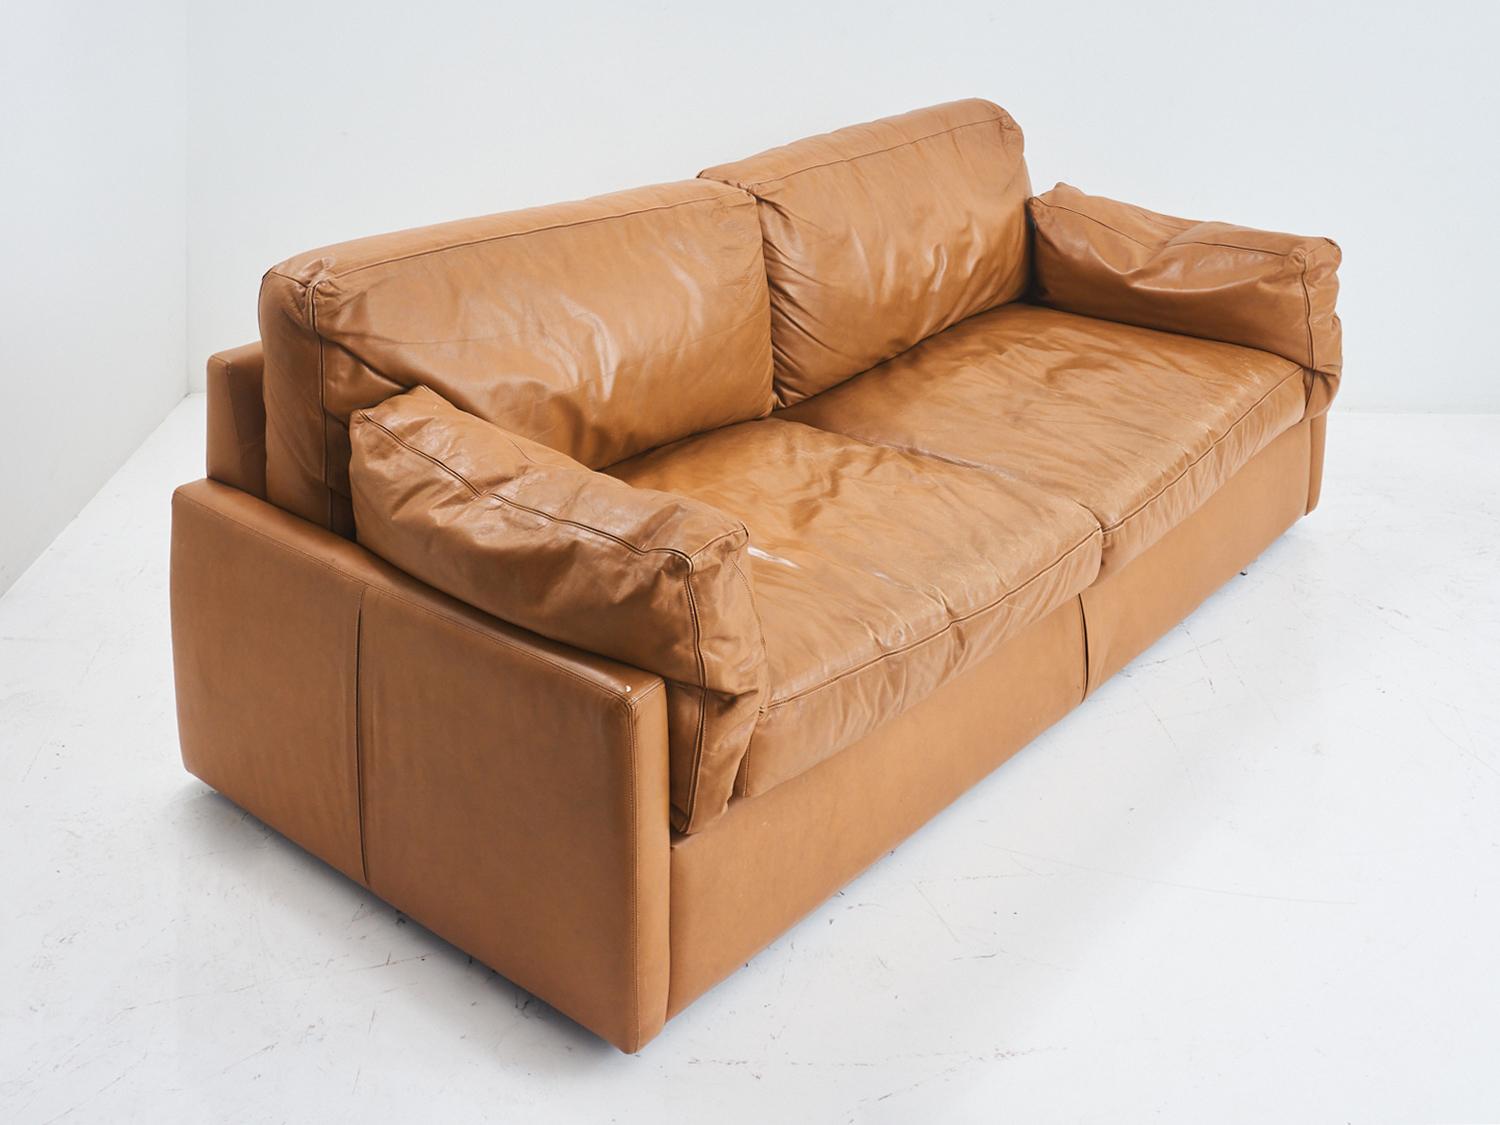 With its rich, warm hue and buttery soft texture, this sofa will elevate your living space to the next level of sophistication. So grab a glass of your favorite cognac and sink into its plush embrace, because with this sofa, your relaxation just got